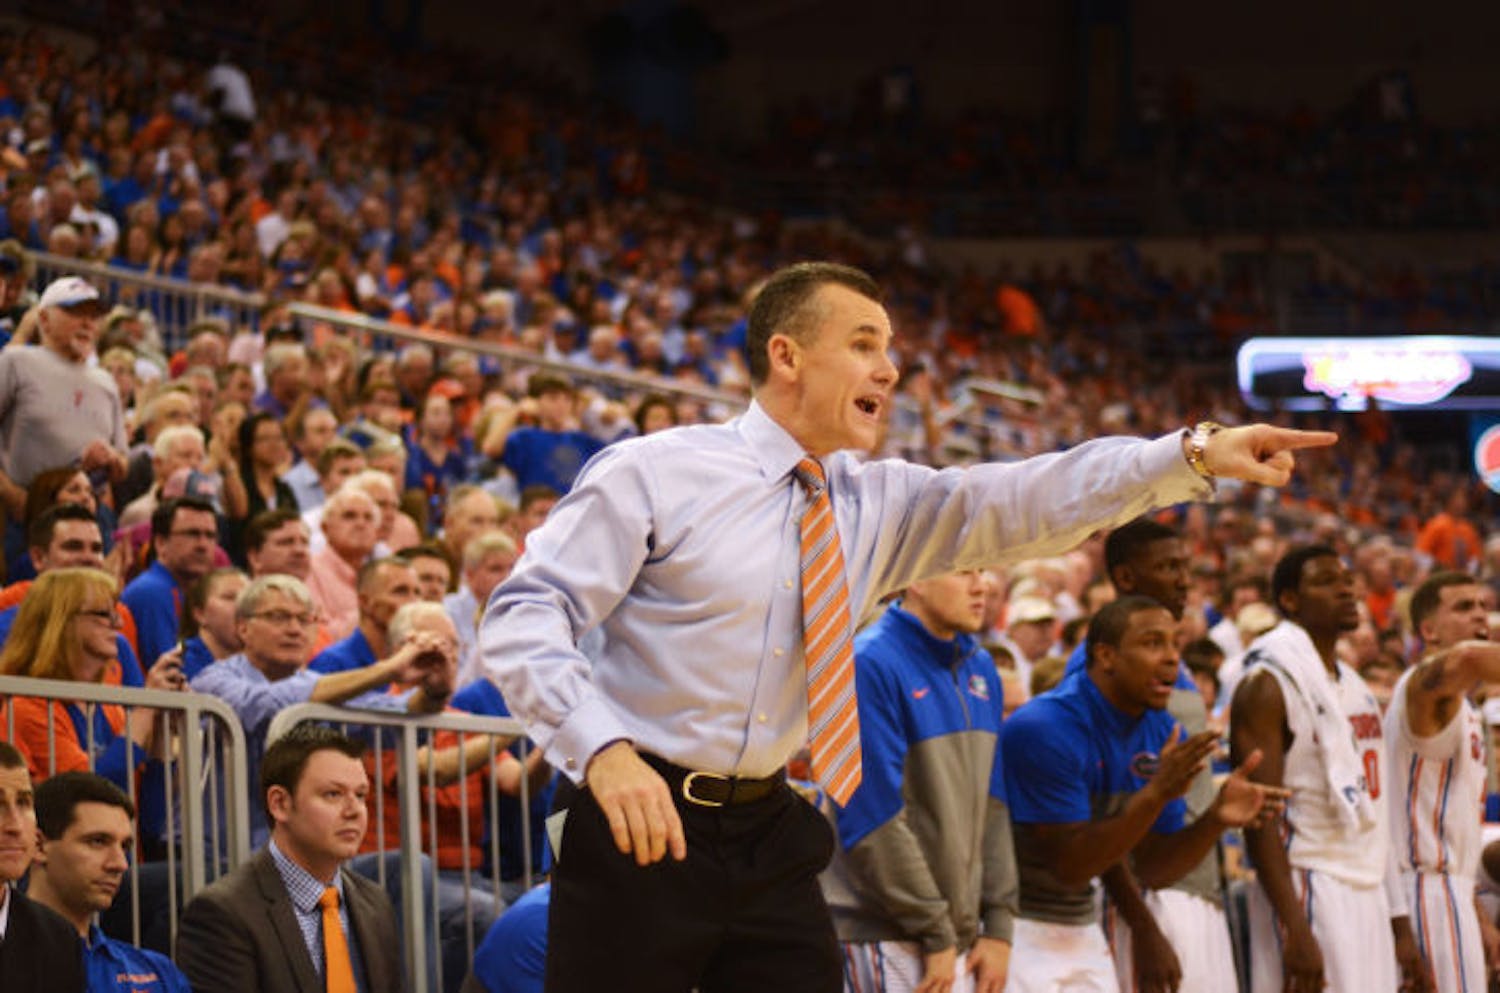 UF coach Billy Donovan calls a play during No. 19 Florida's 67-61 win against No. 13 Kansas on Tuesday night in the O'Connell Center.